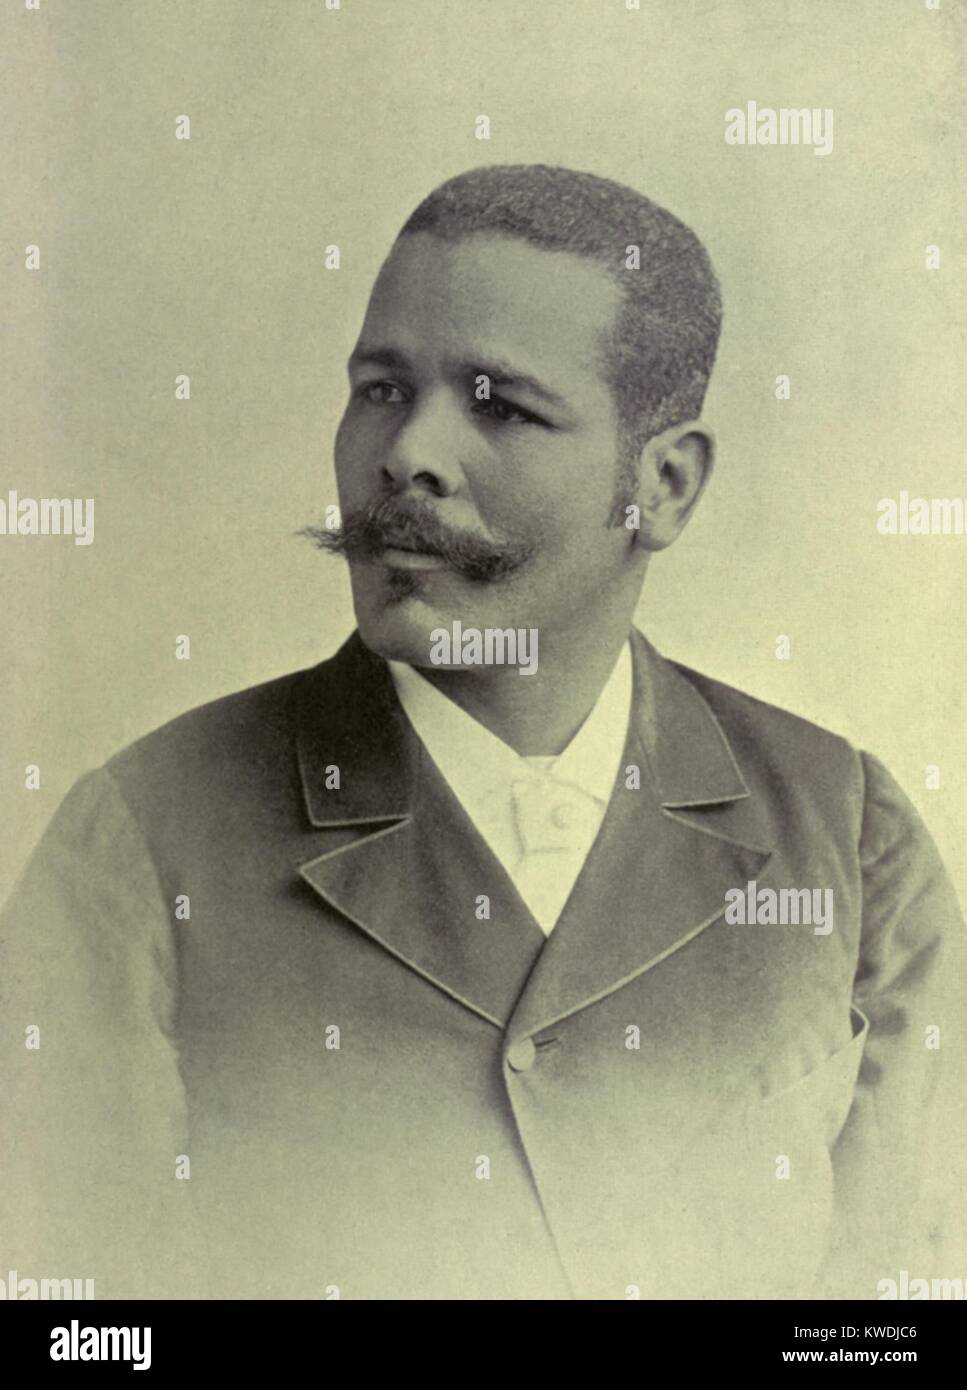 General Jose Antonio Maceo was a commander in the Cuban Army of Independence. Maceo lead regular and guerrilla forces against Spanish forces until his death in Dec. 1896 (BSLOC 2017 10 4) Stock Photo